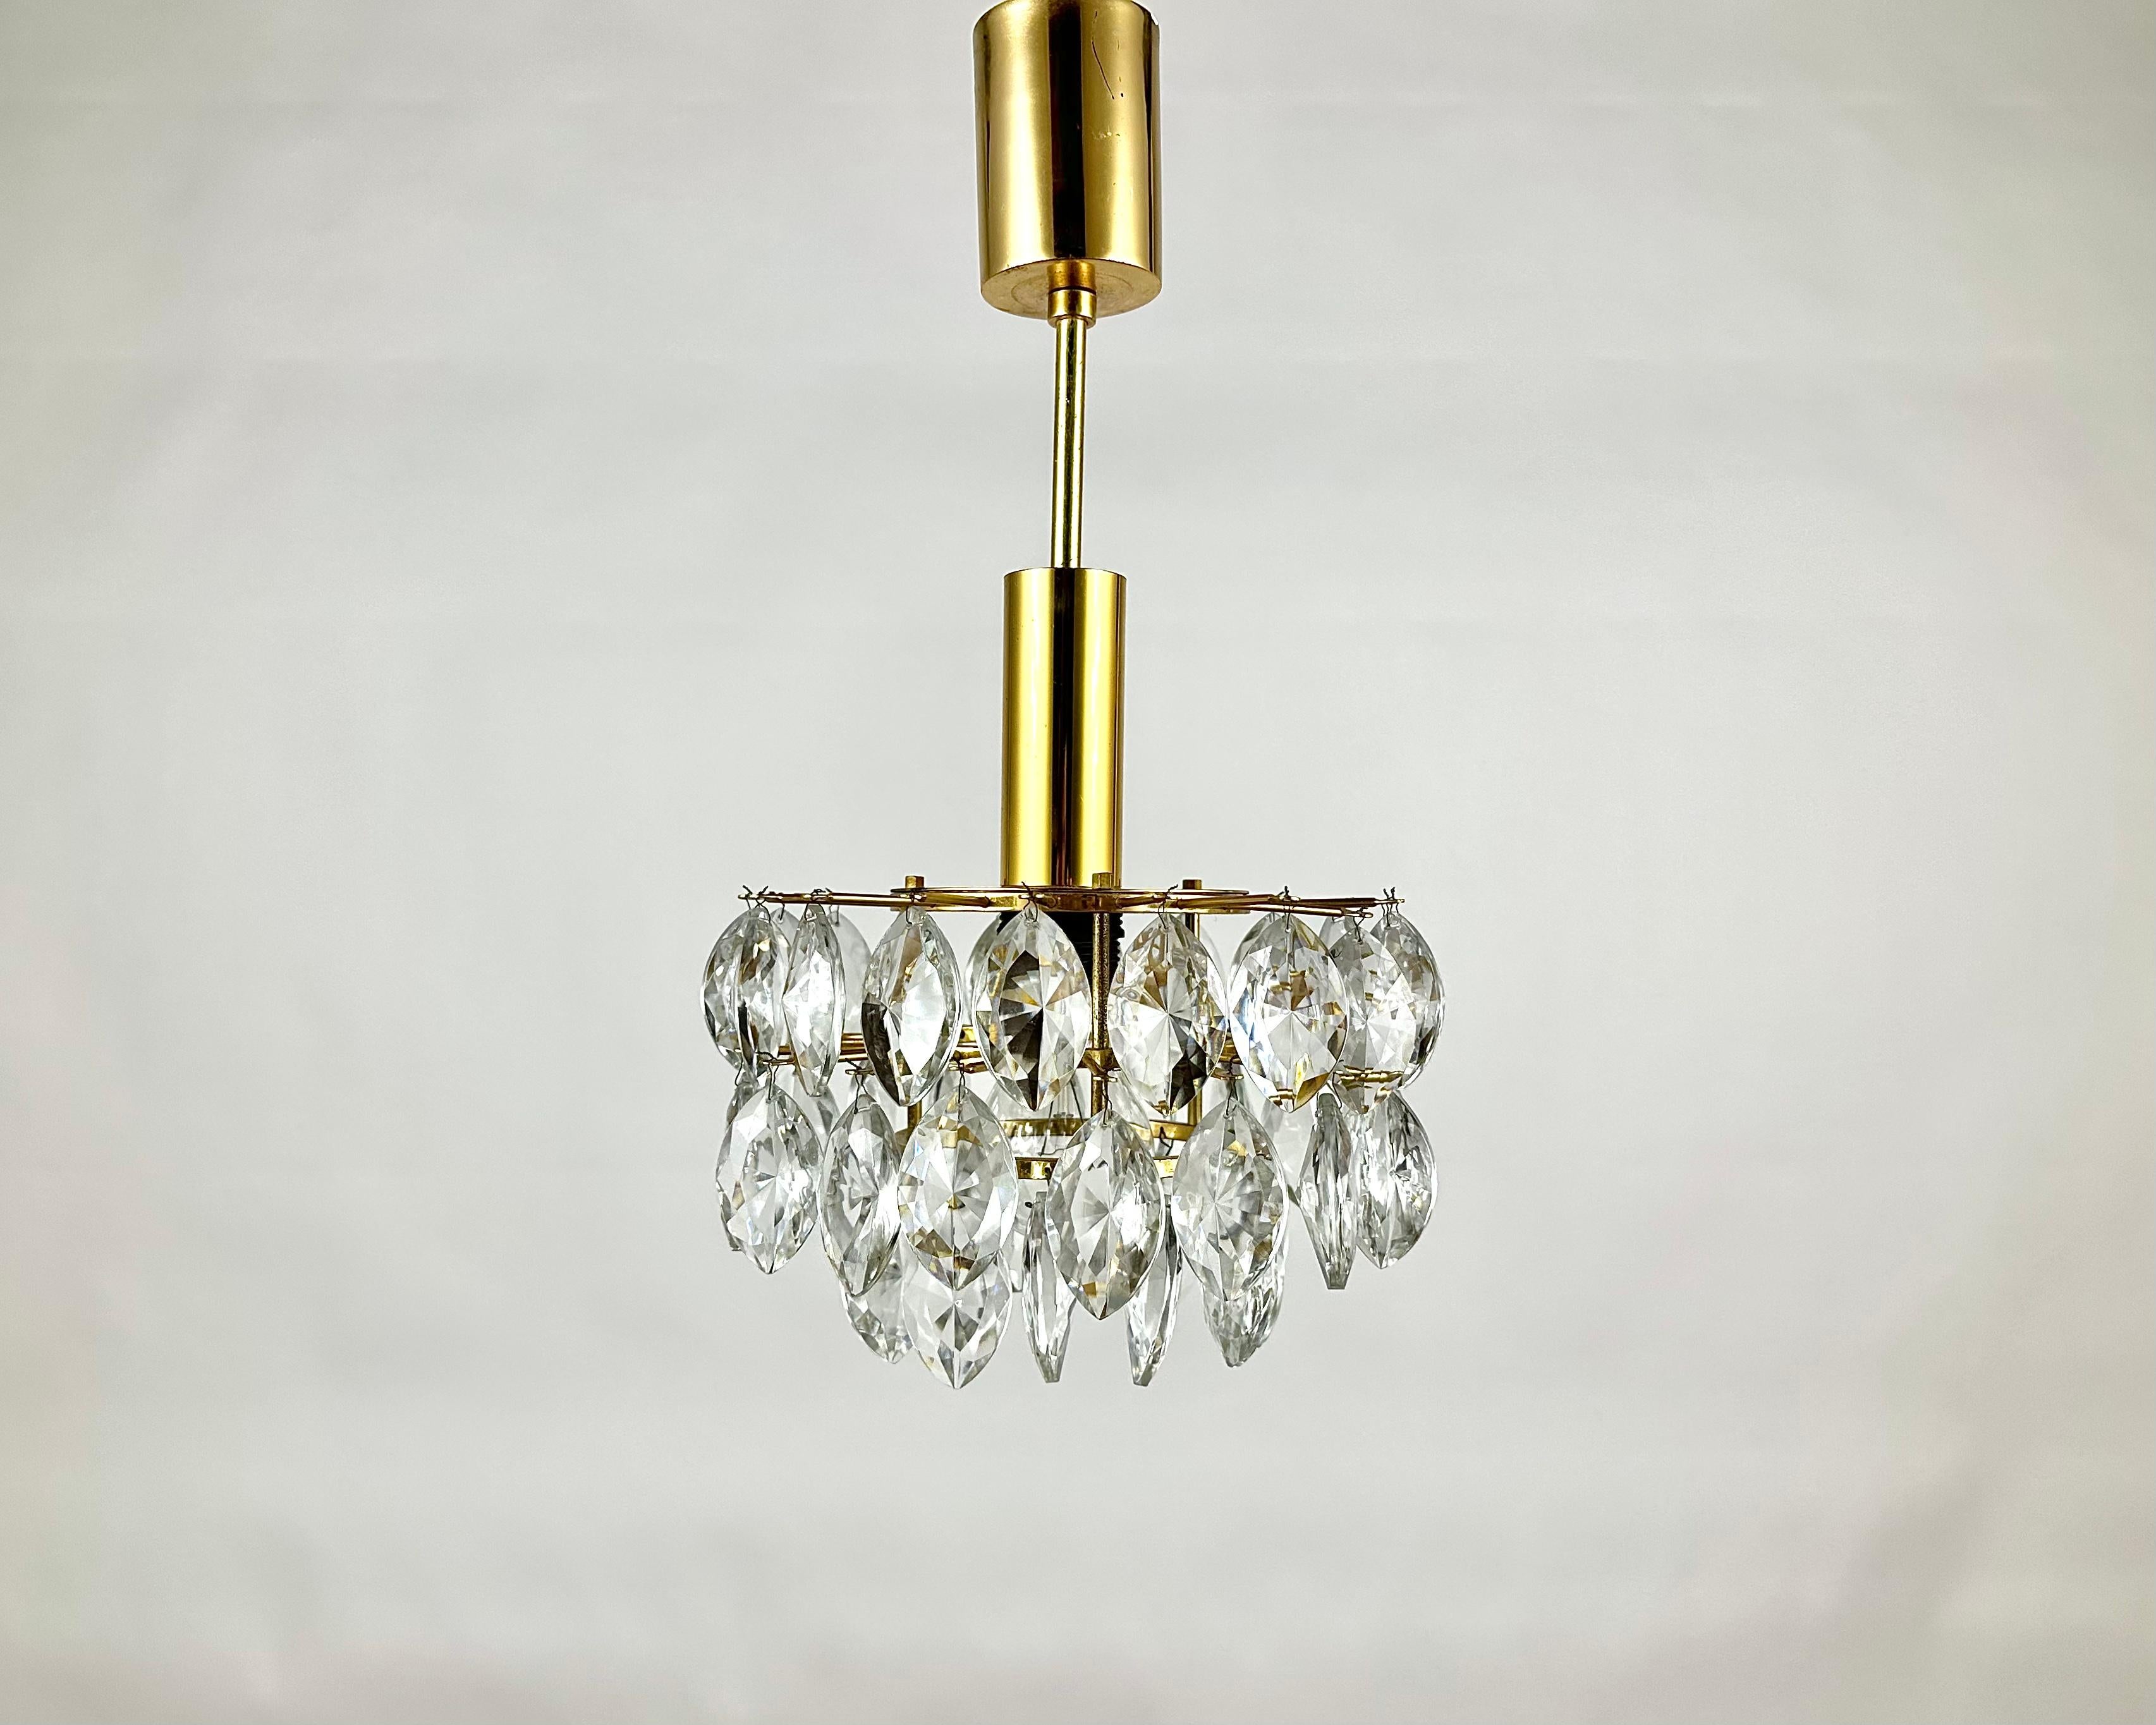 Vintage Crystal and Brass Chandelier for 1 light point.

Manufactured in Germany.

This beautiful chandelier has a classic style and is made of high quality materials that guarantee durability and reliability. 

One of the main advantages of this